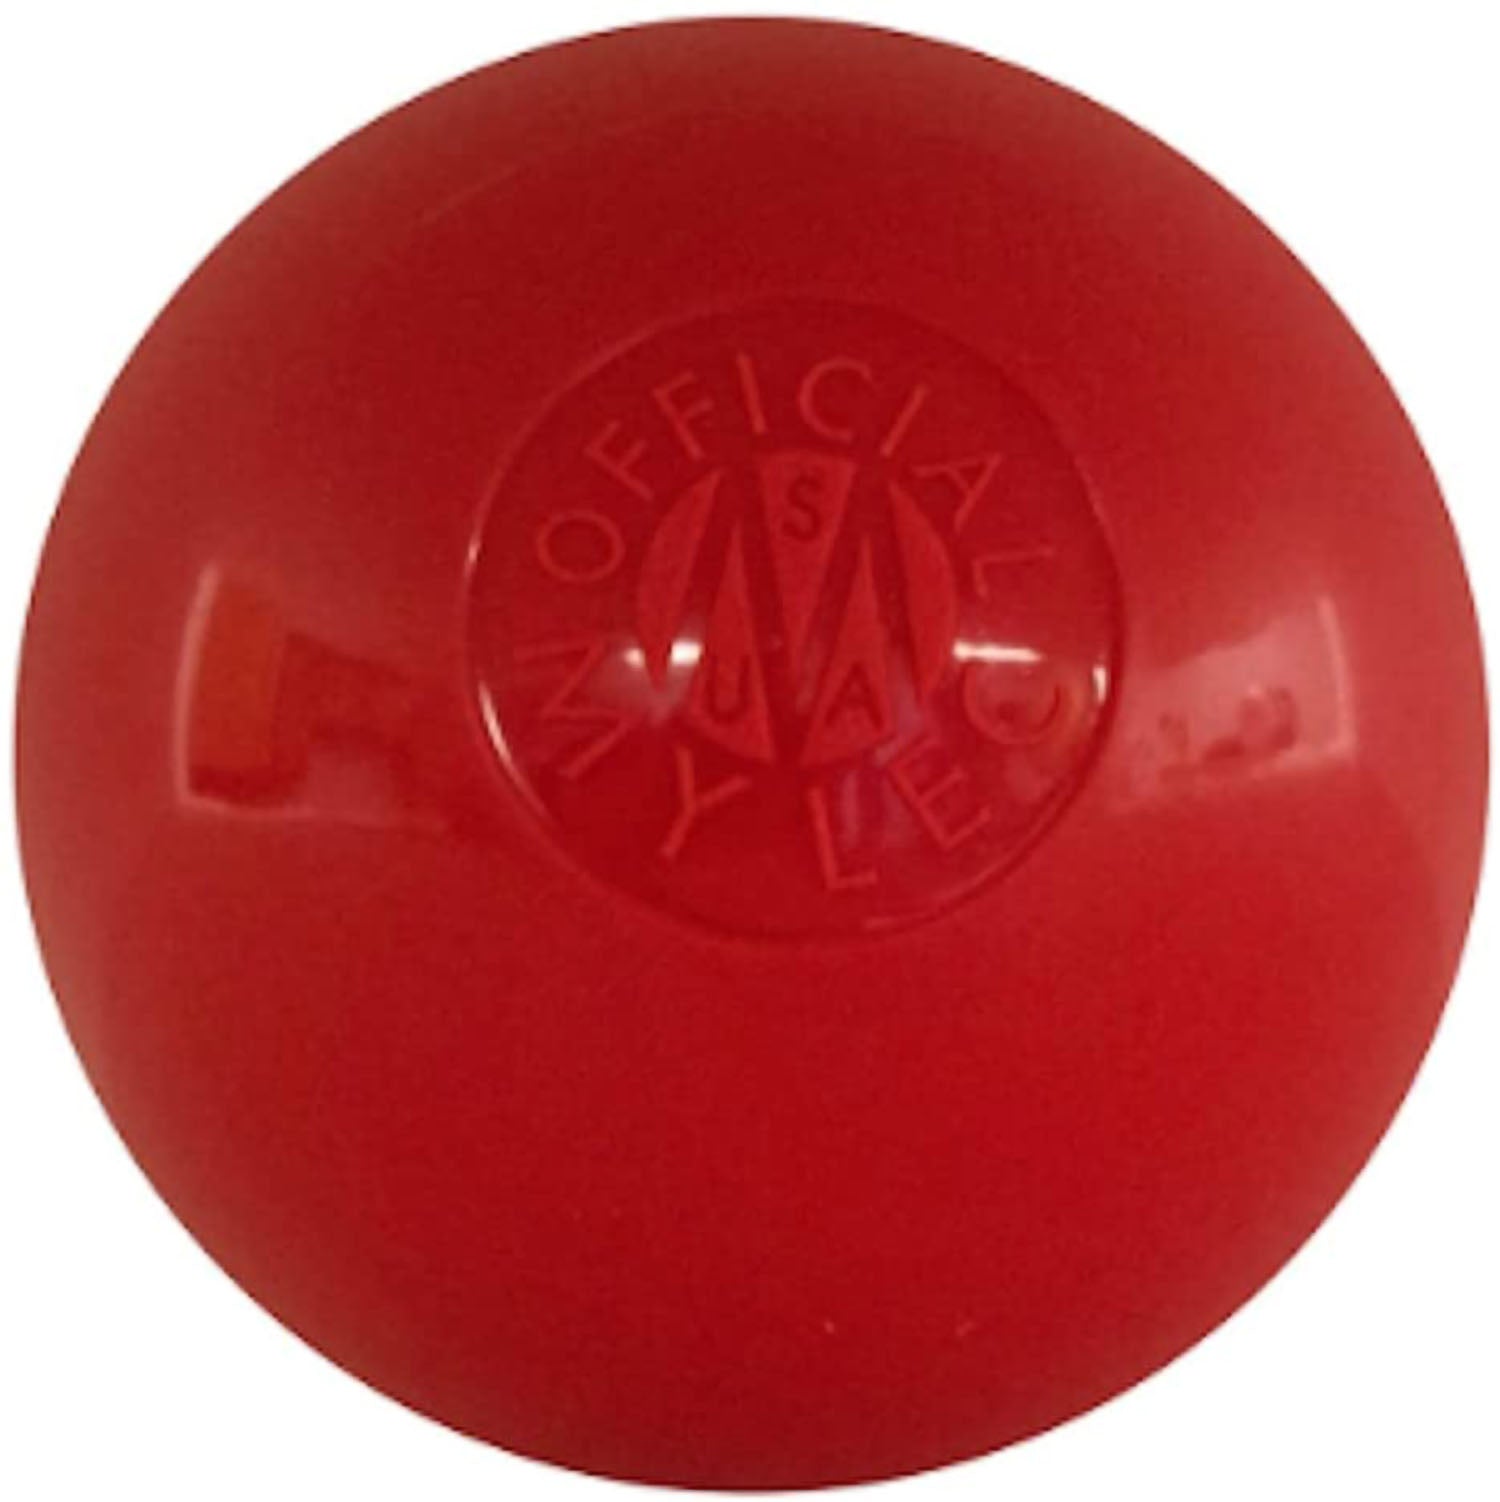 Mylec Original No Bounce Hockey Ball - Red - Hot 75° and Over - 6 Pack - Pro-Distributing